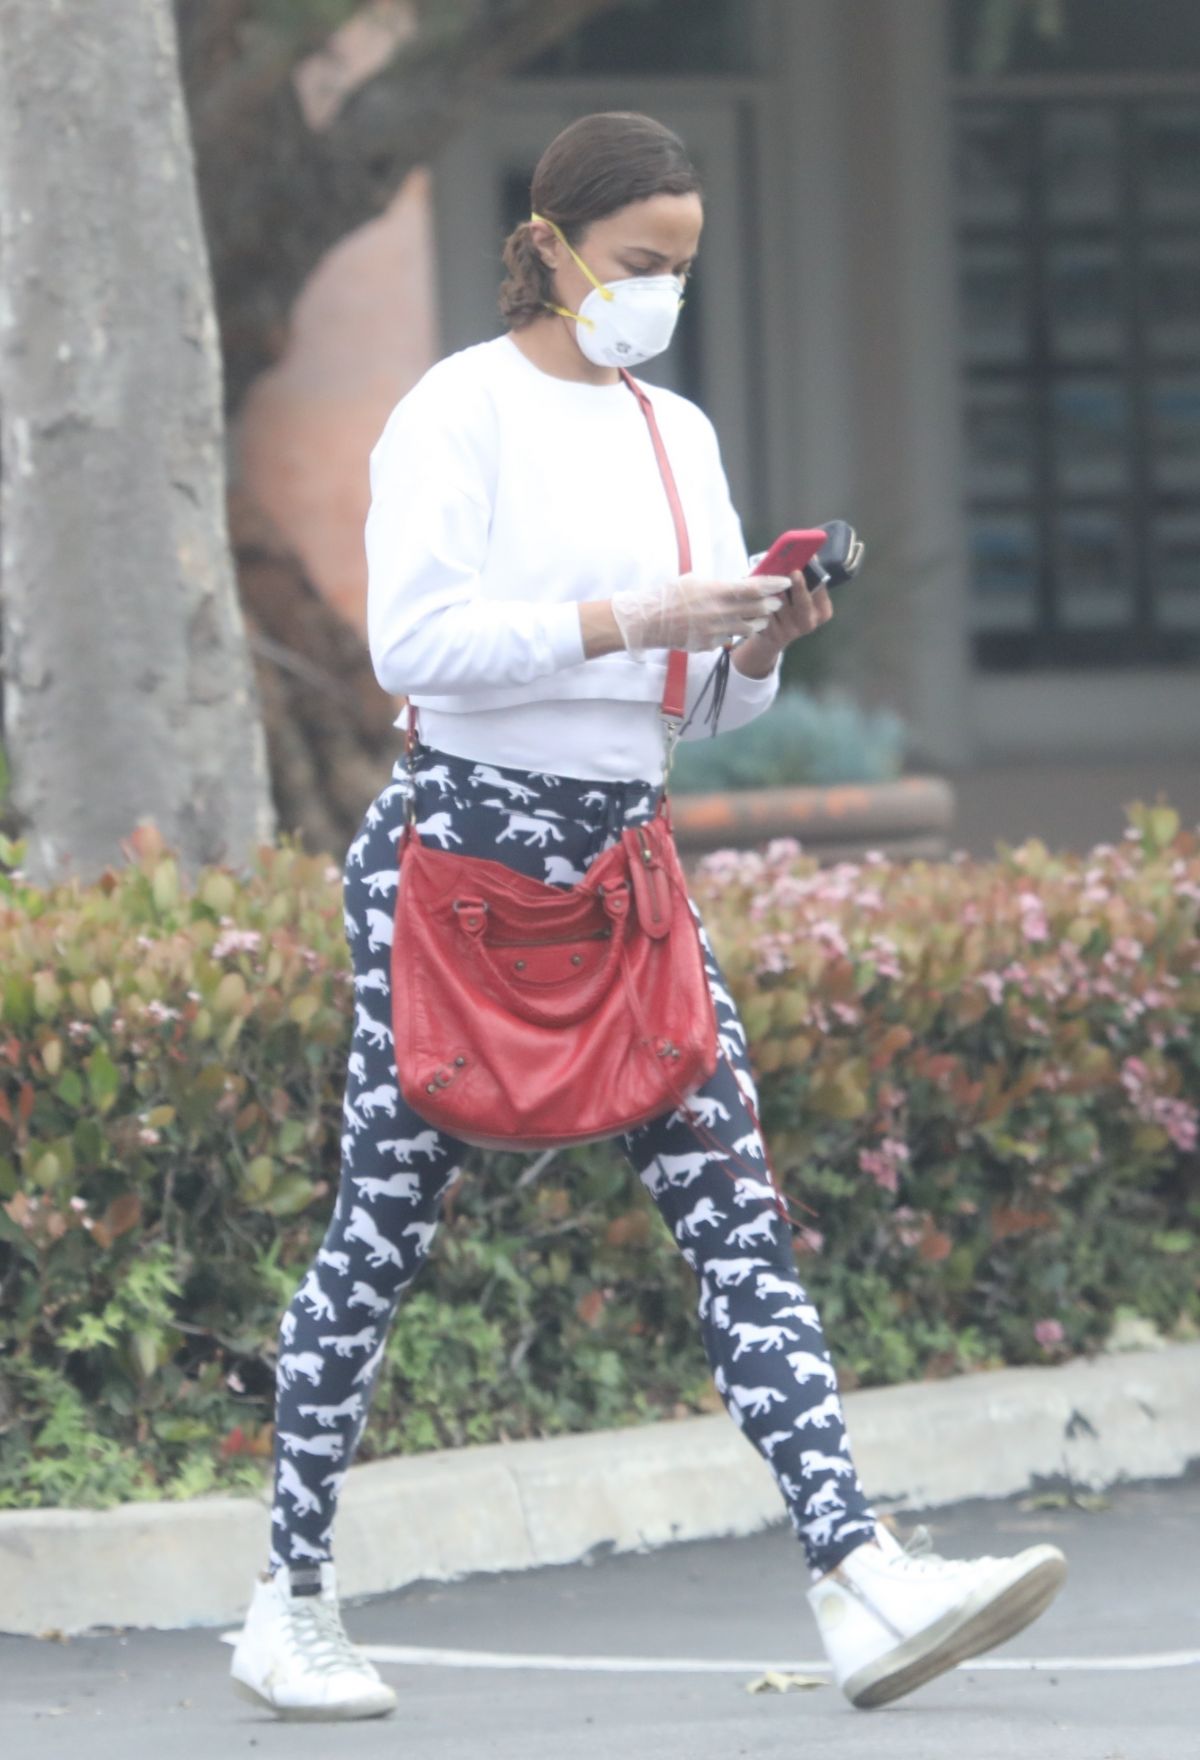 PAULA PATTON Wearing Mask and Gloves at ATM in Malibu 04/16/2020 ...